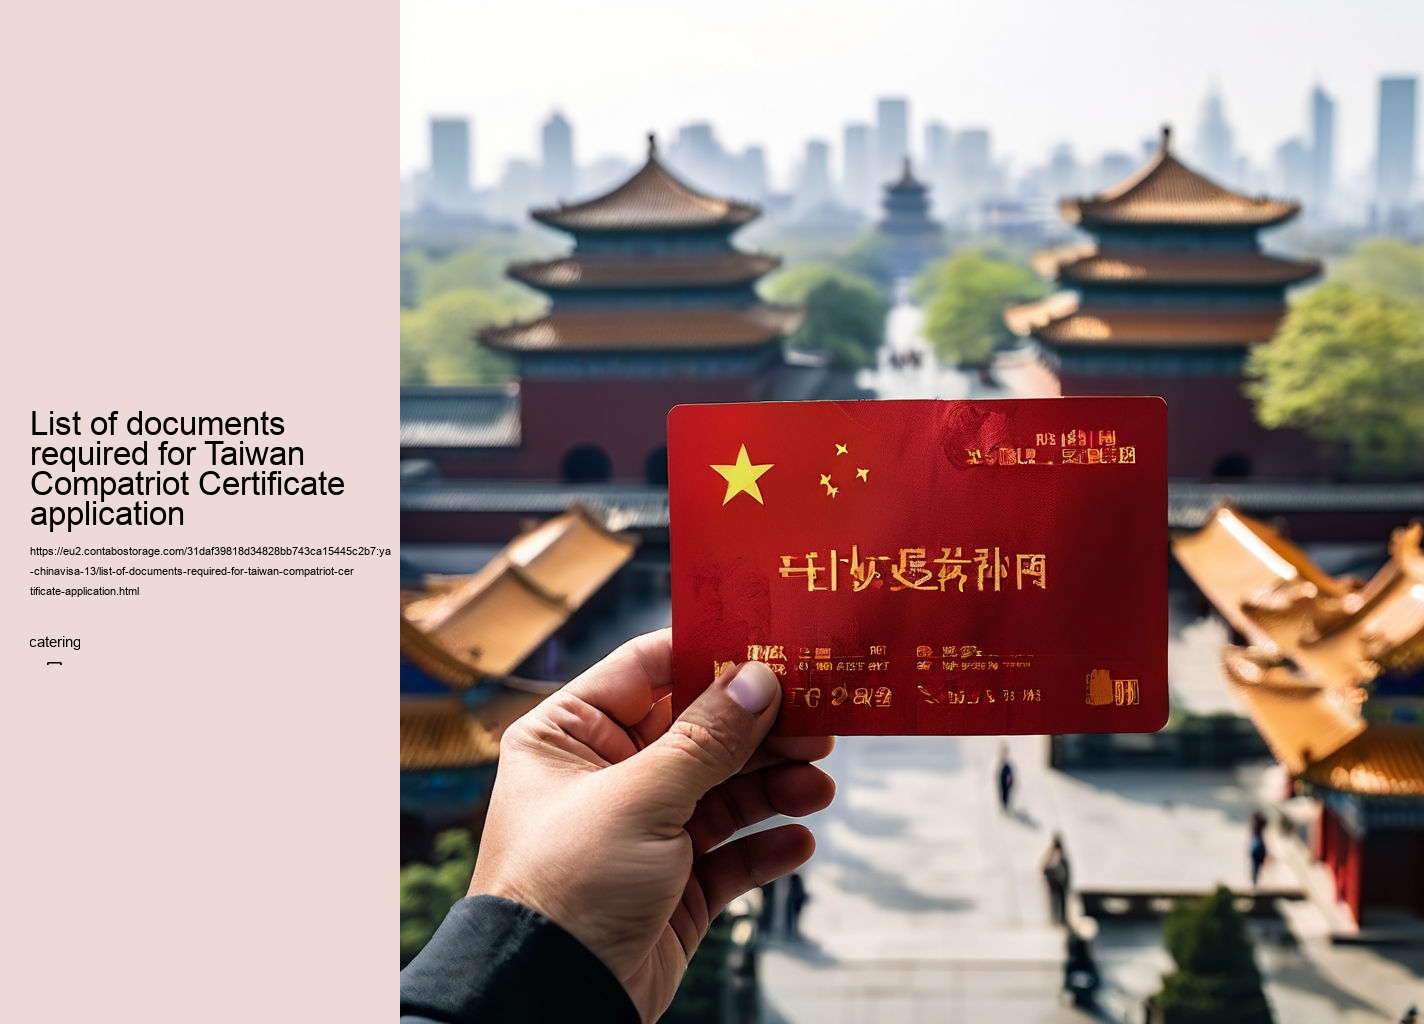 List of documents required for Taiwan Compatriot Certificate application